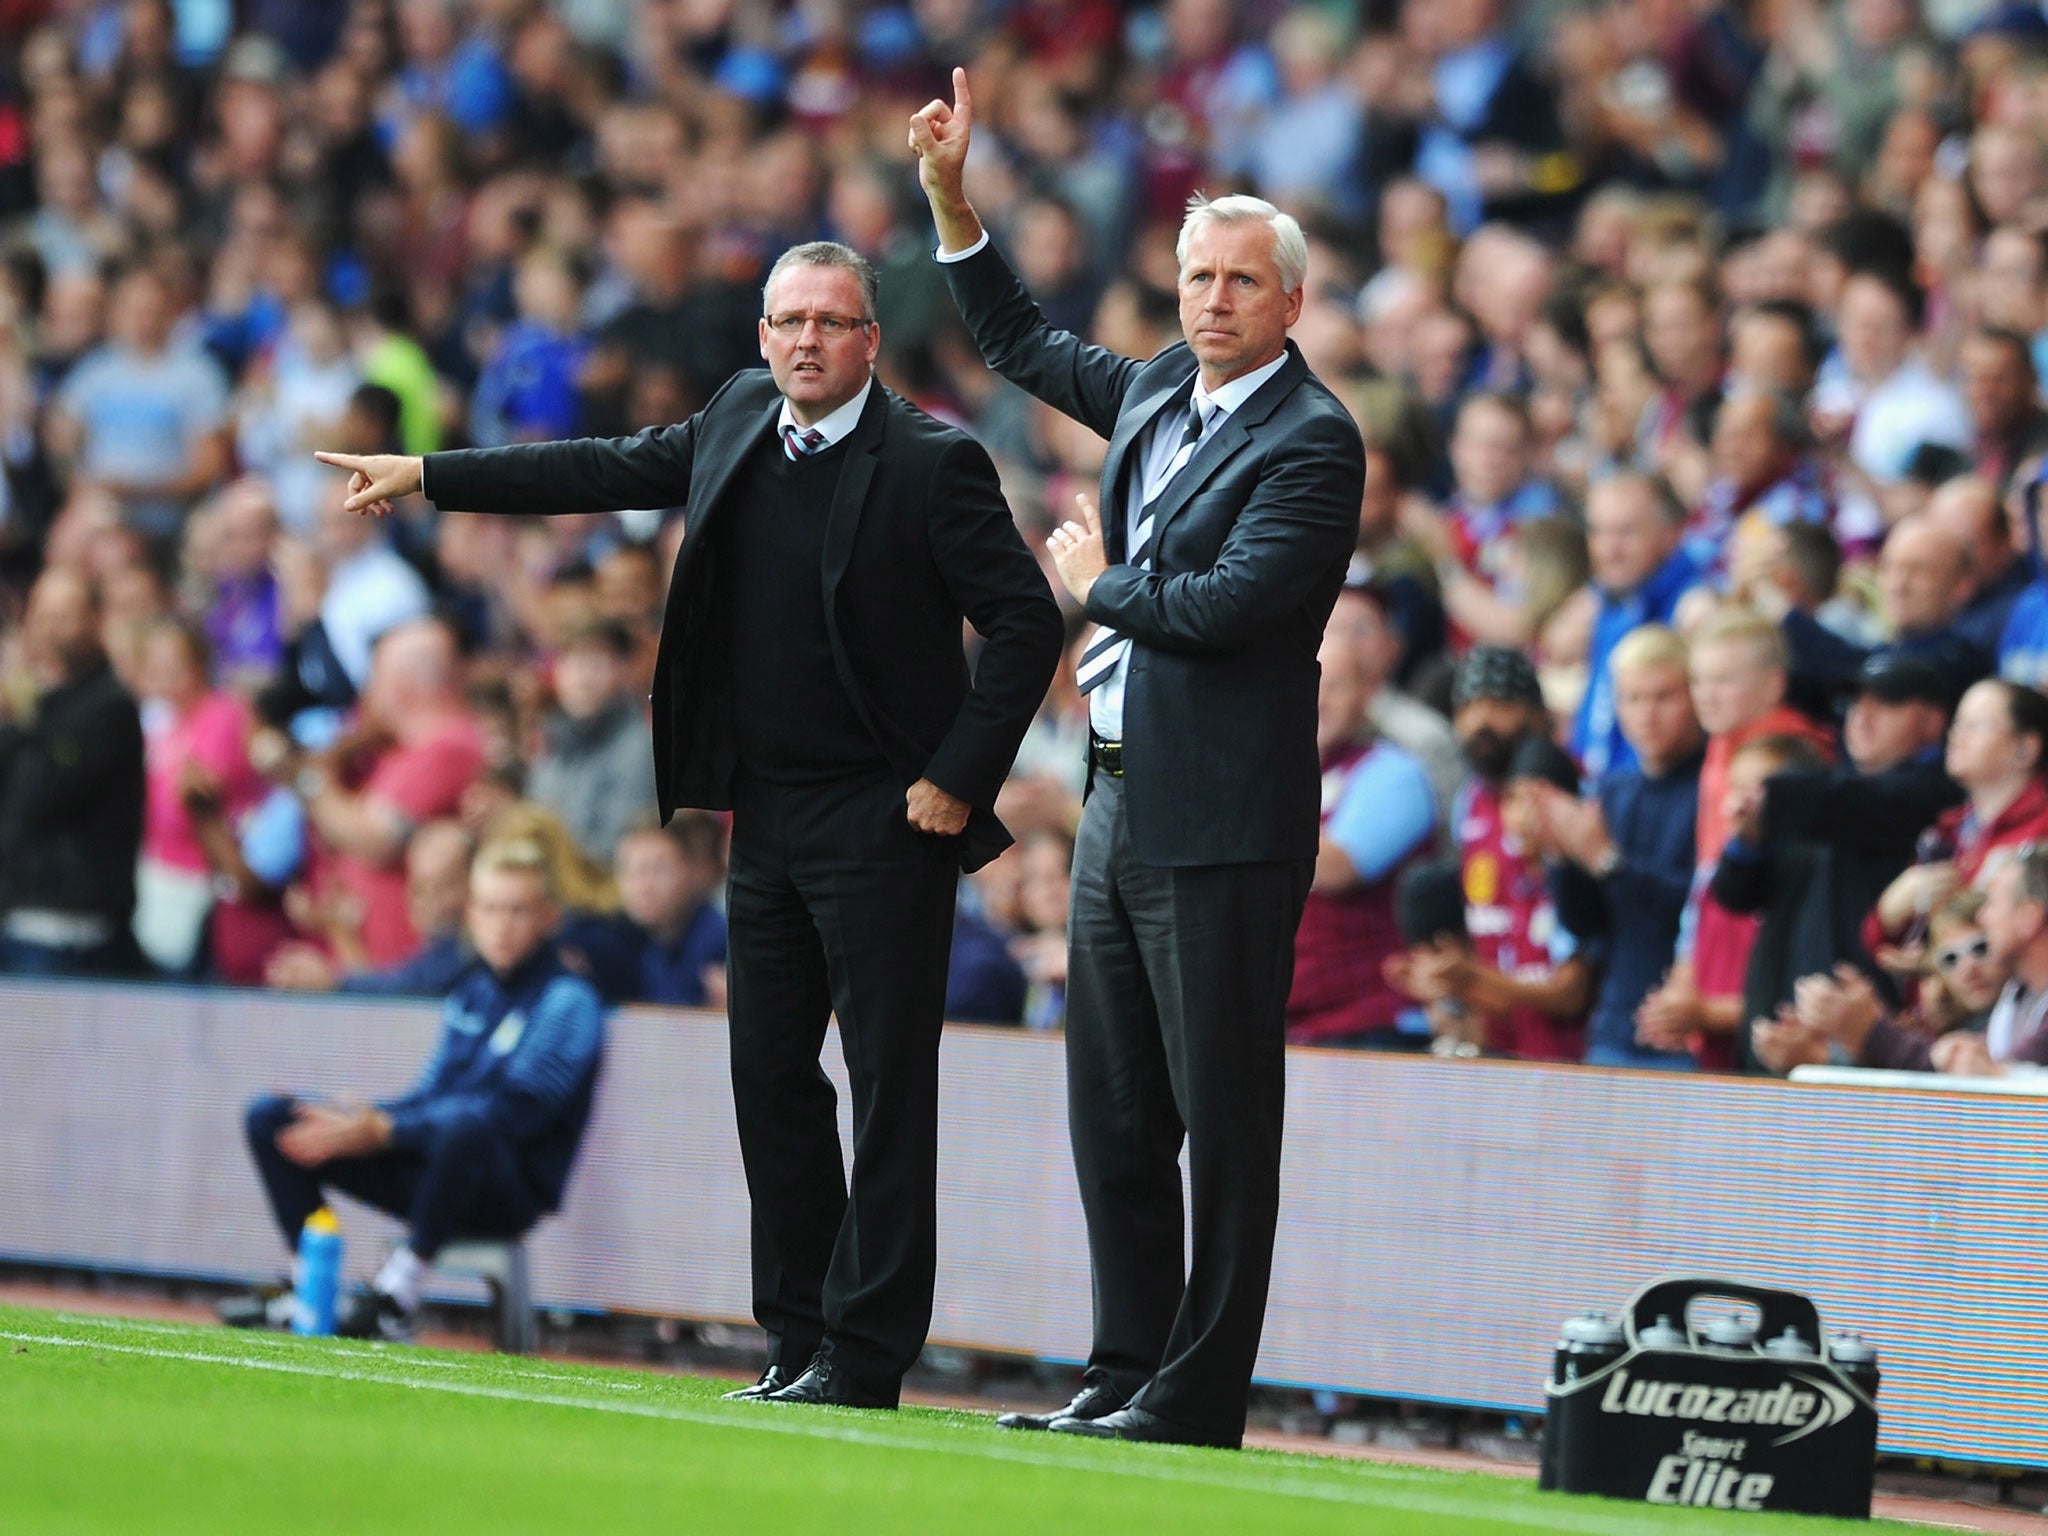 Alan Pardew says Newcastle 'absolutely dominated' and deserved to win against Aston Villa